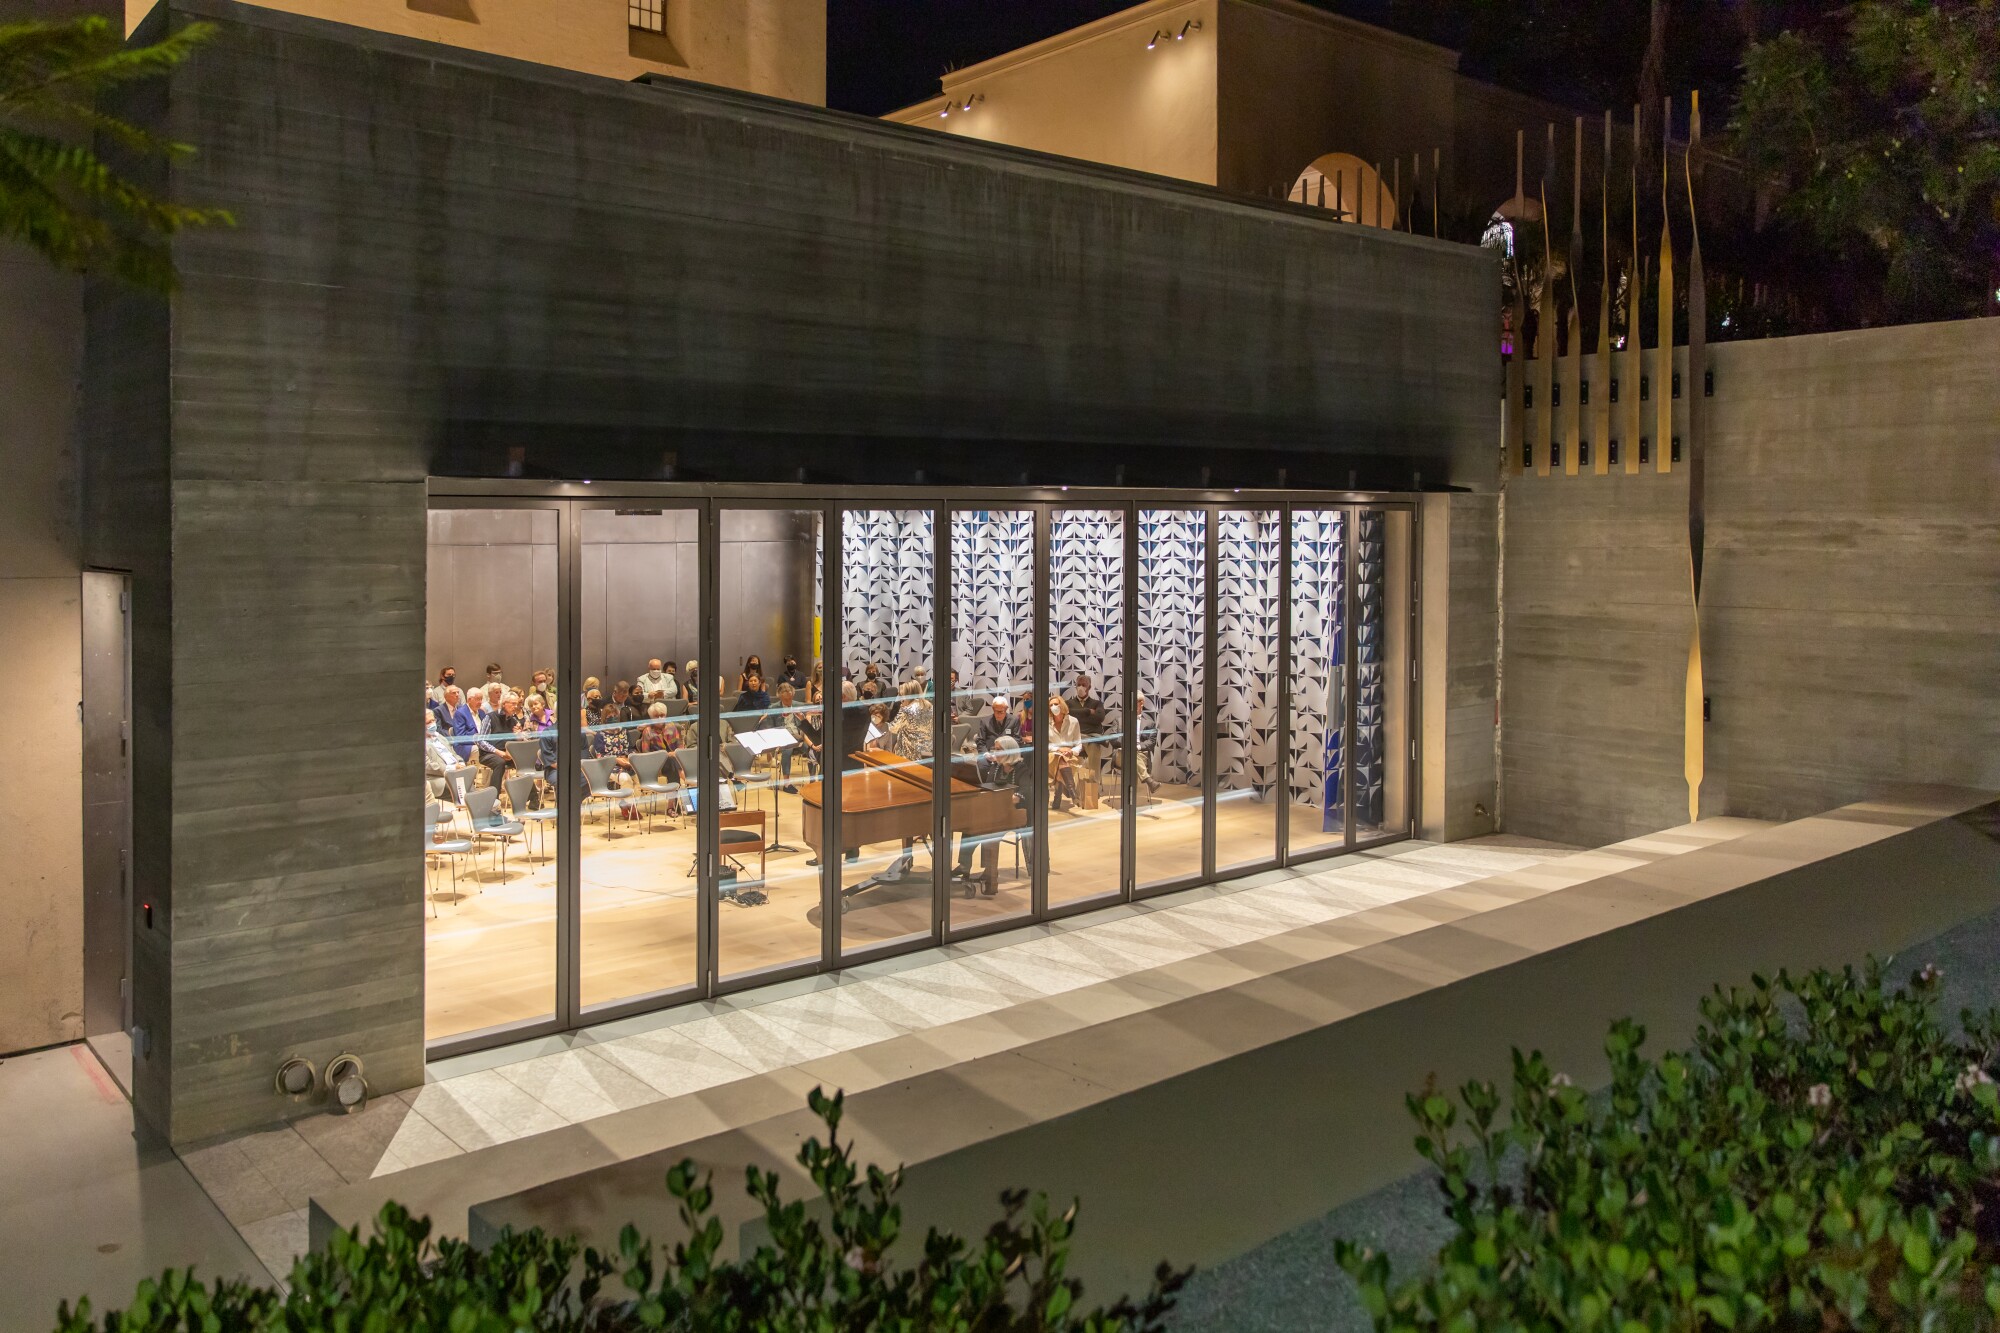 The Mingei's new theater space is seen at night from outdoors, illuminated from within.